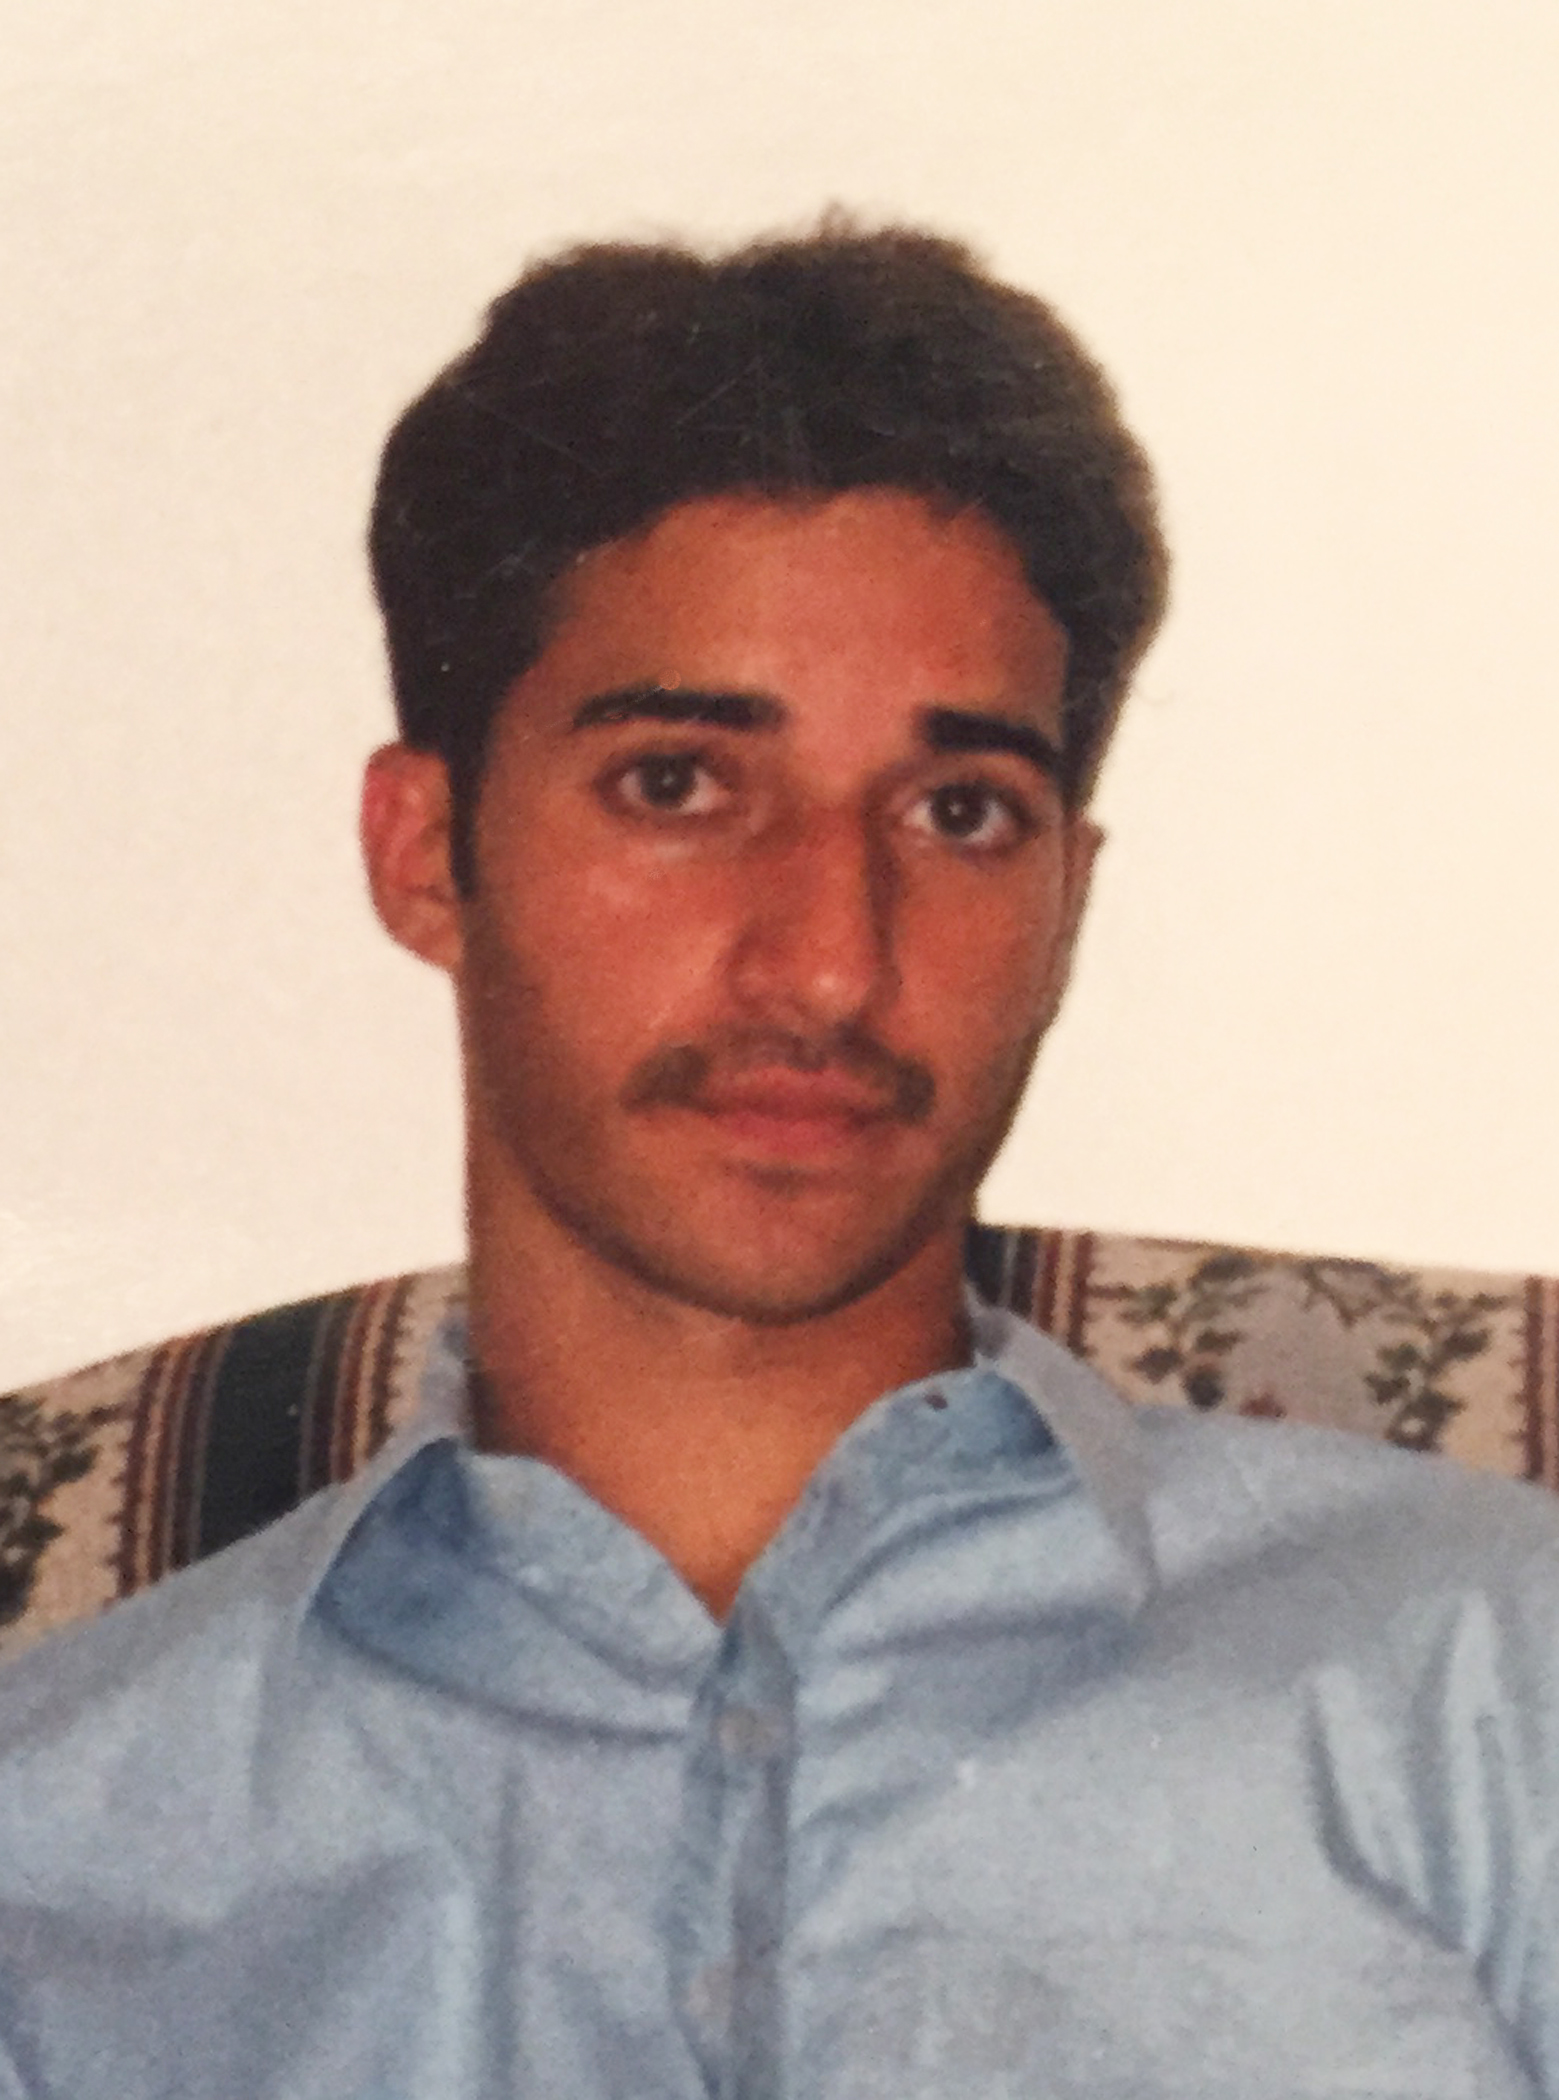 PHOTO: Adnan Syed is shown in an undated photo provided by his brother, Yusuf Syed.